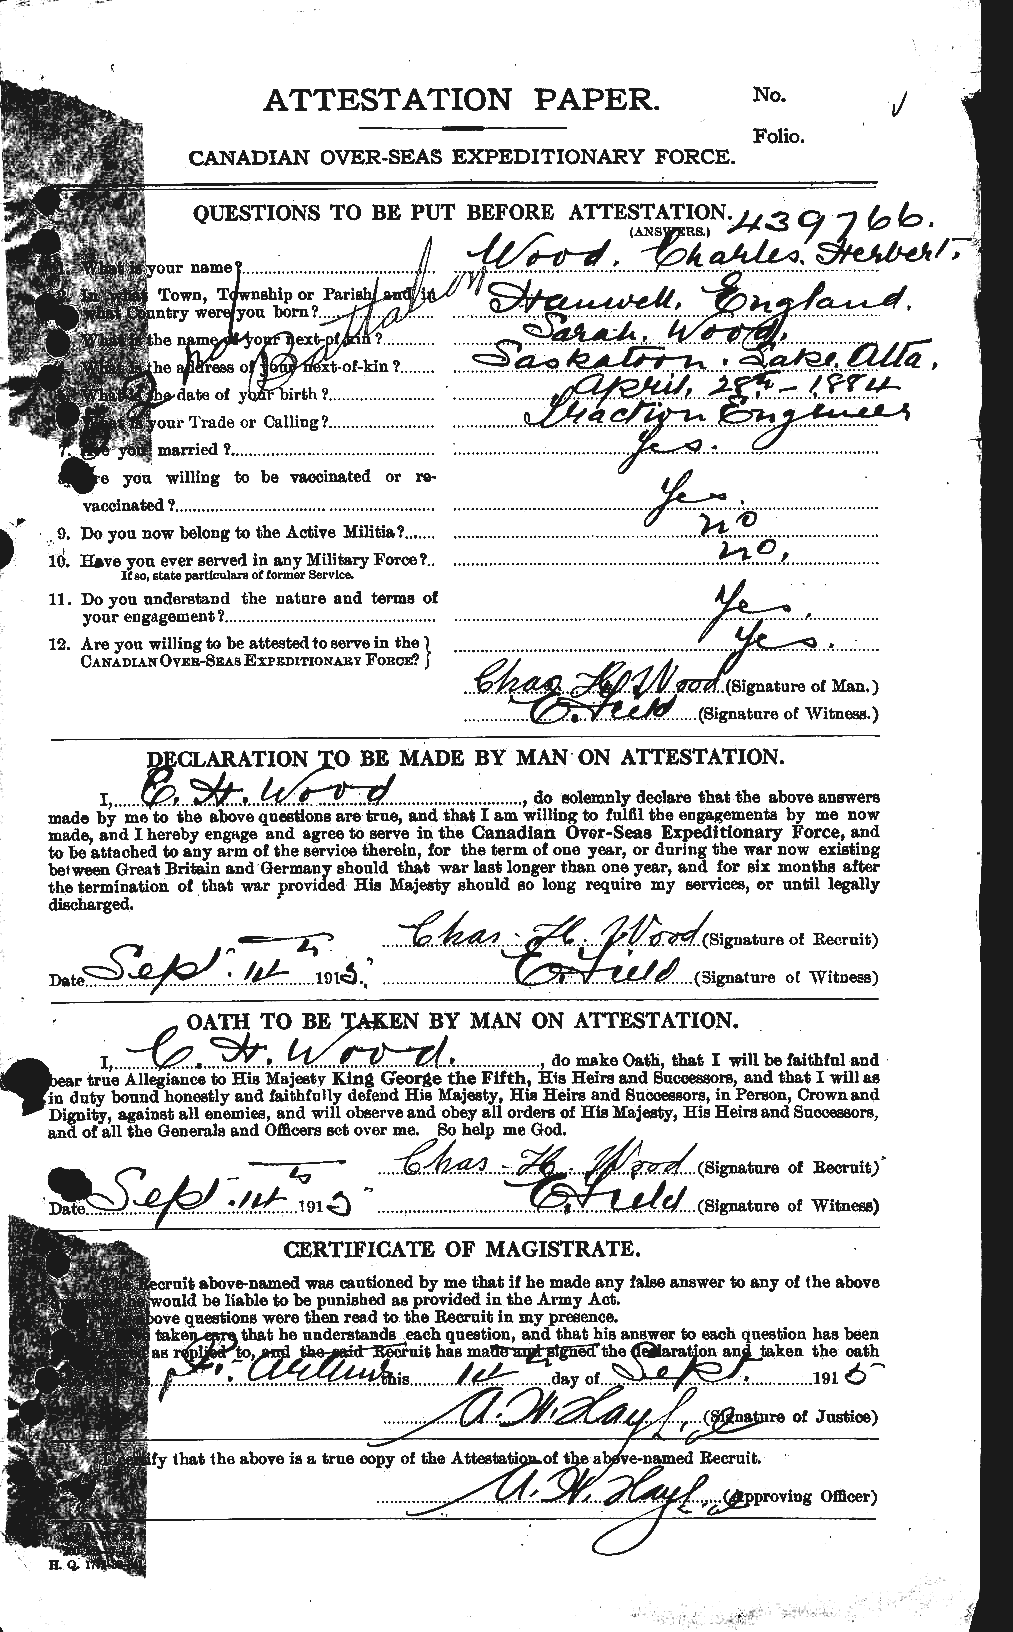 Personnel Records of the First World War - CEF 682896a